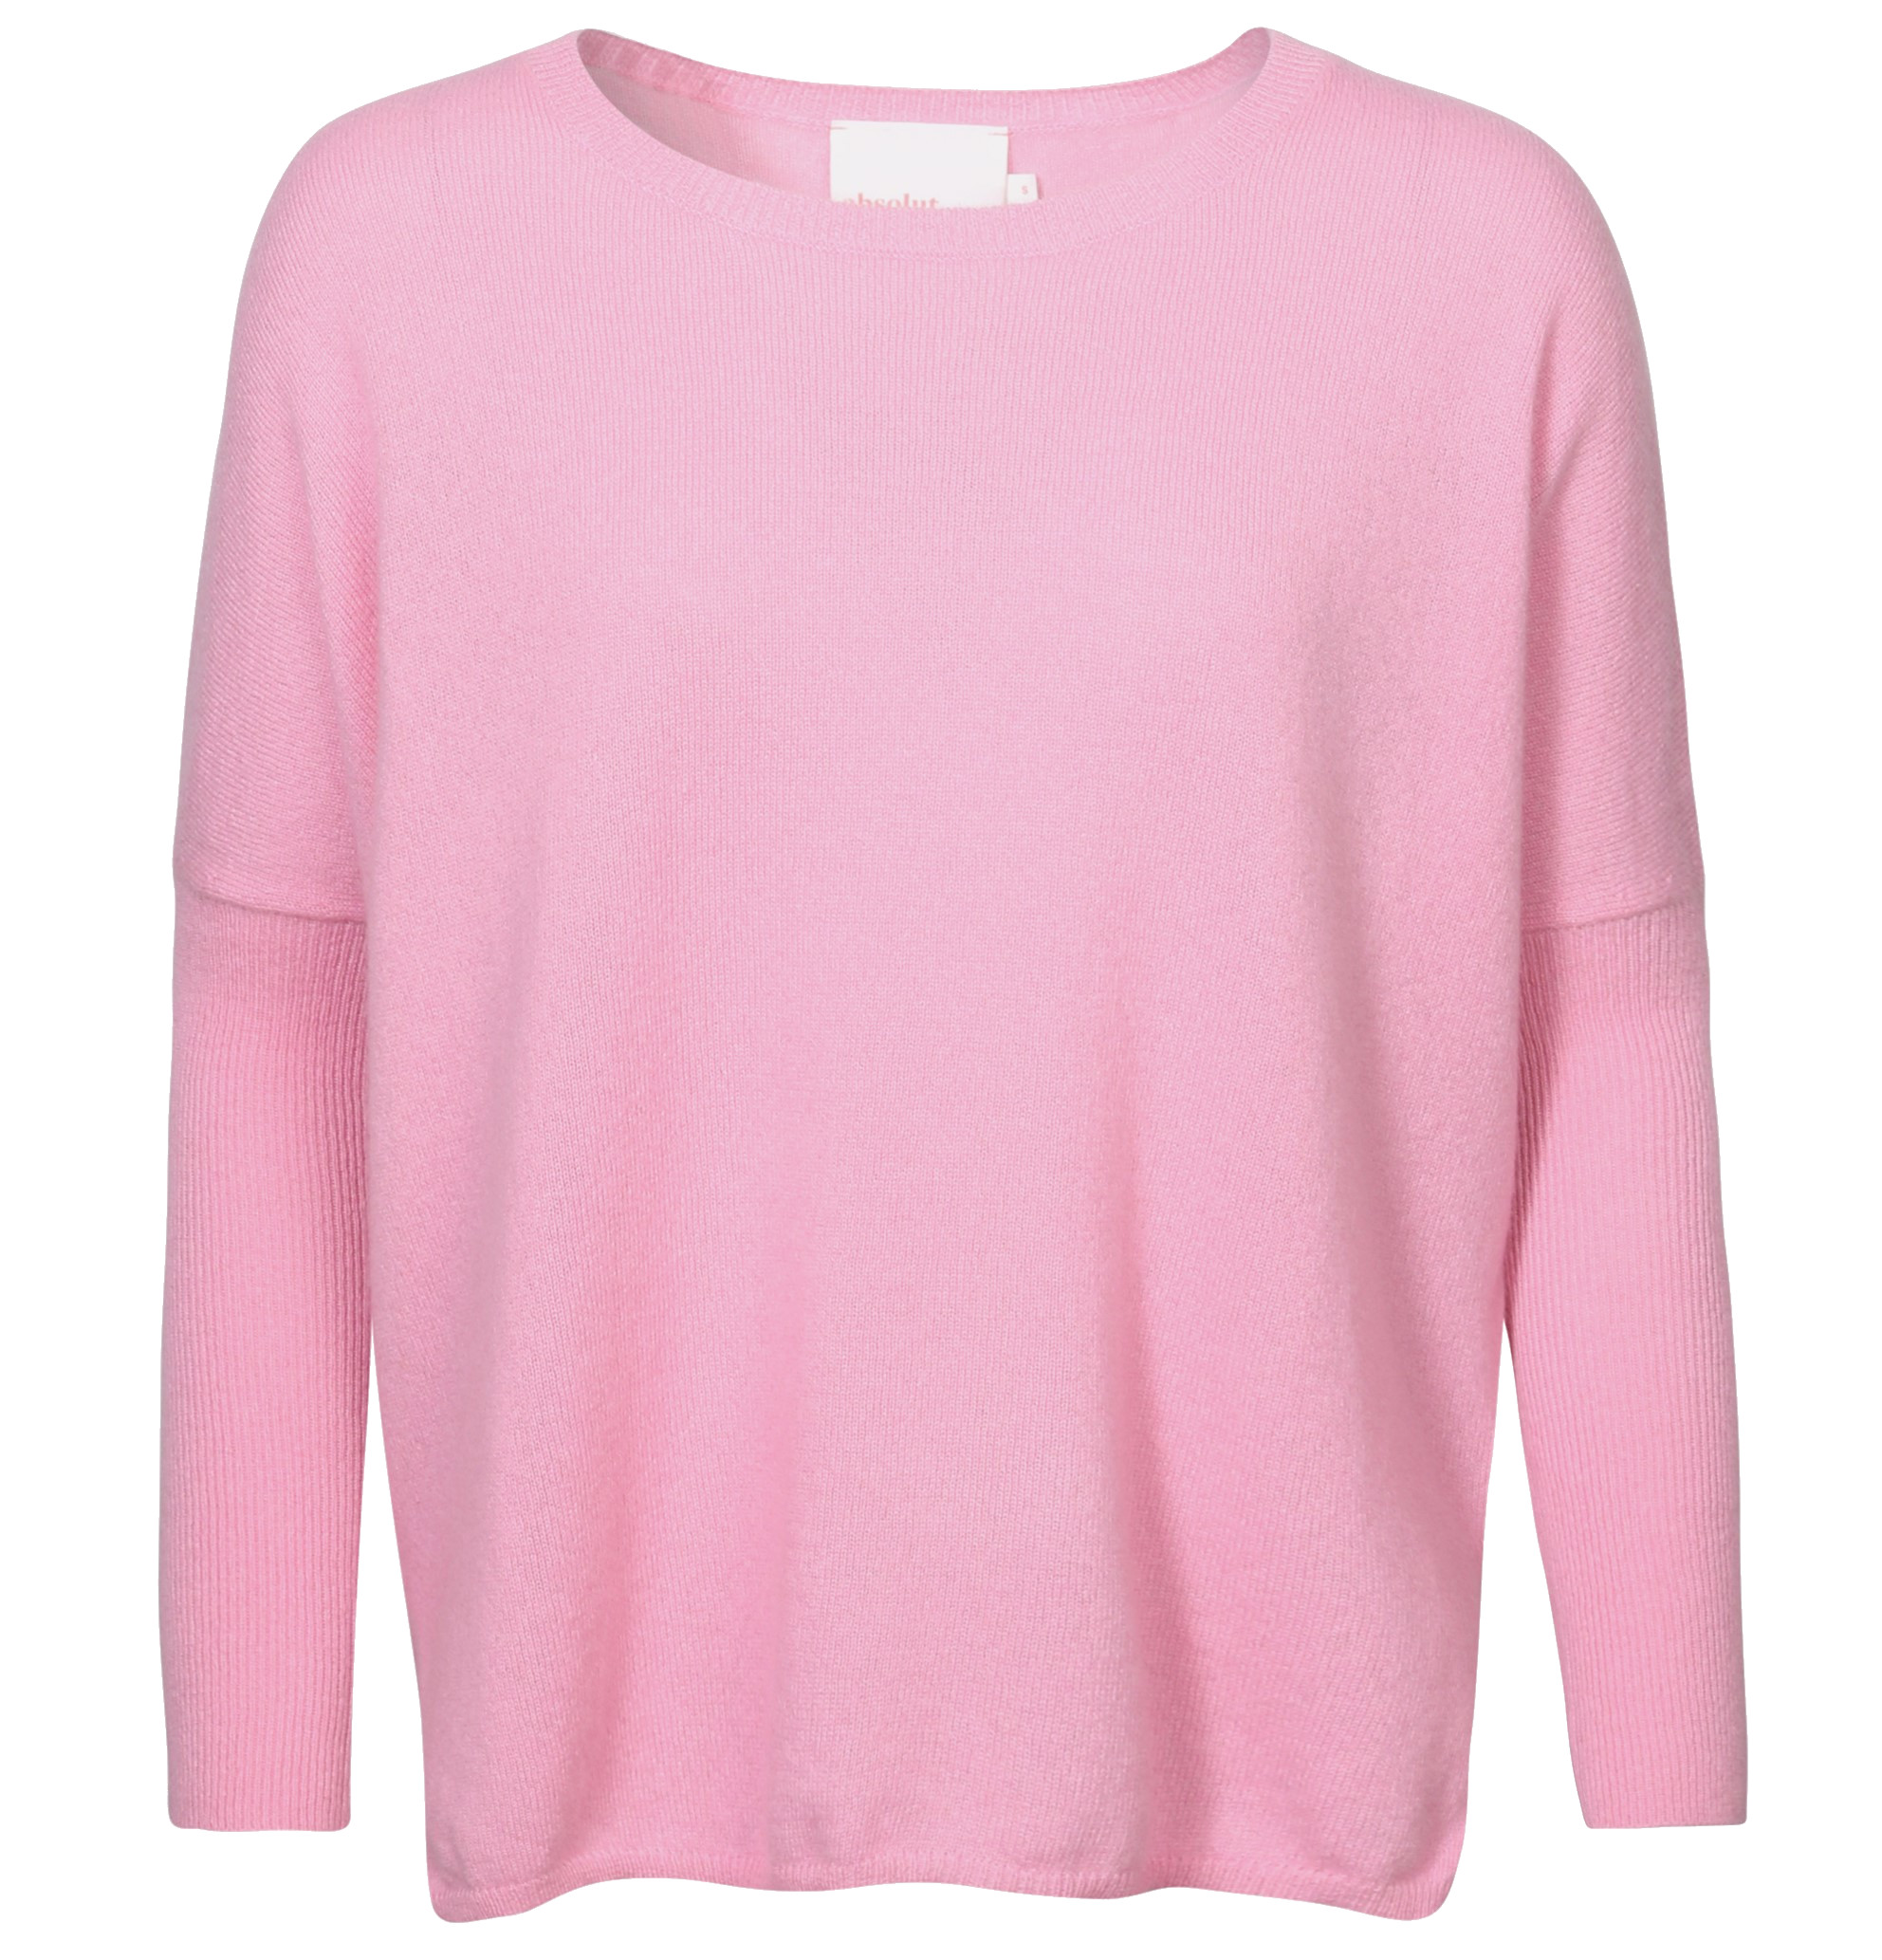 ABSOLUT CASHMERE Poncho Sweater Astrid in Light Pink M